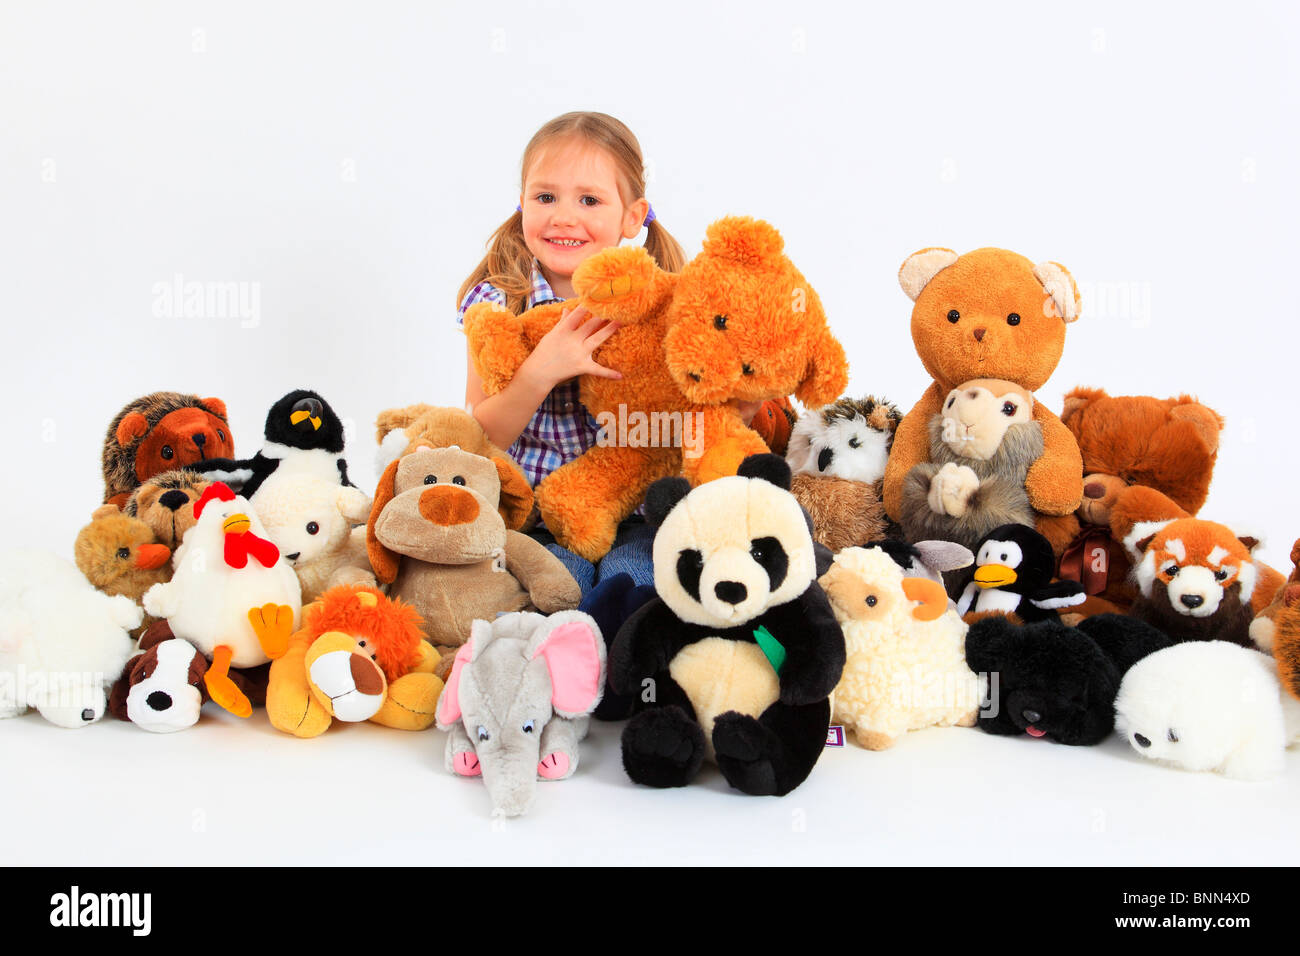 3 3 years 3-year-old blouse bear squirrel elephant donkey owl family joy luck happiness group background dog hedgehog Jeans Stock Photo